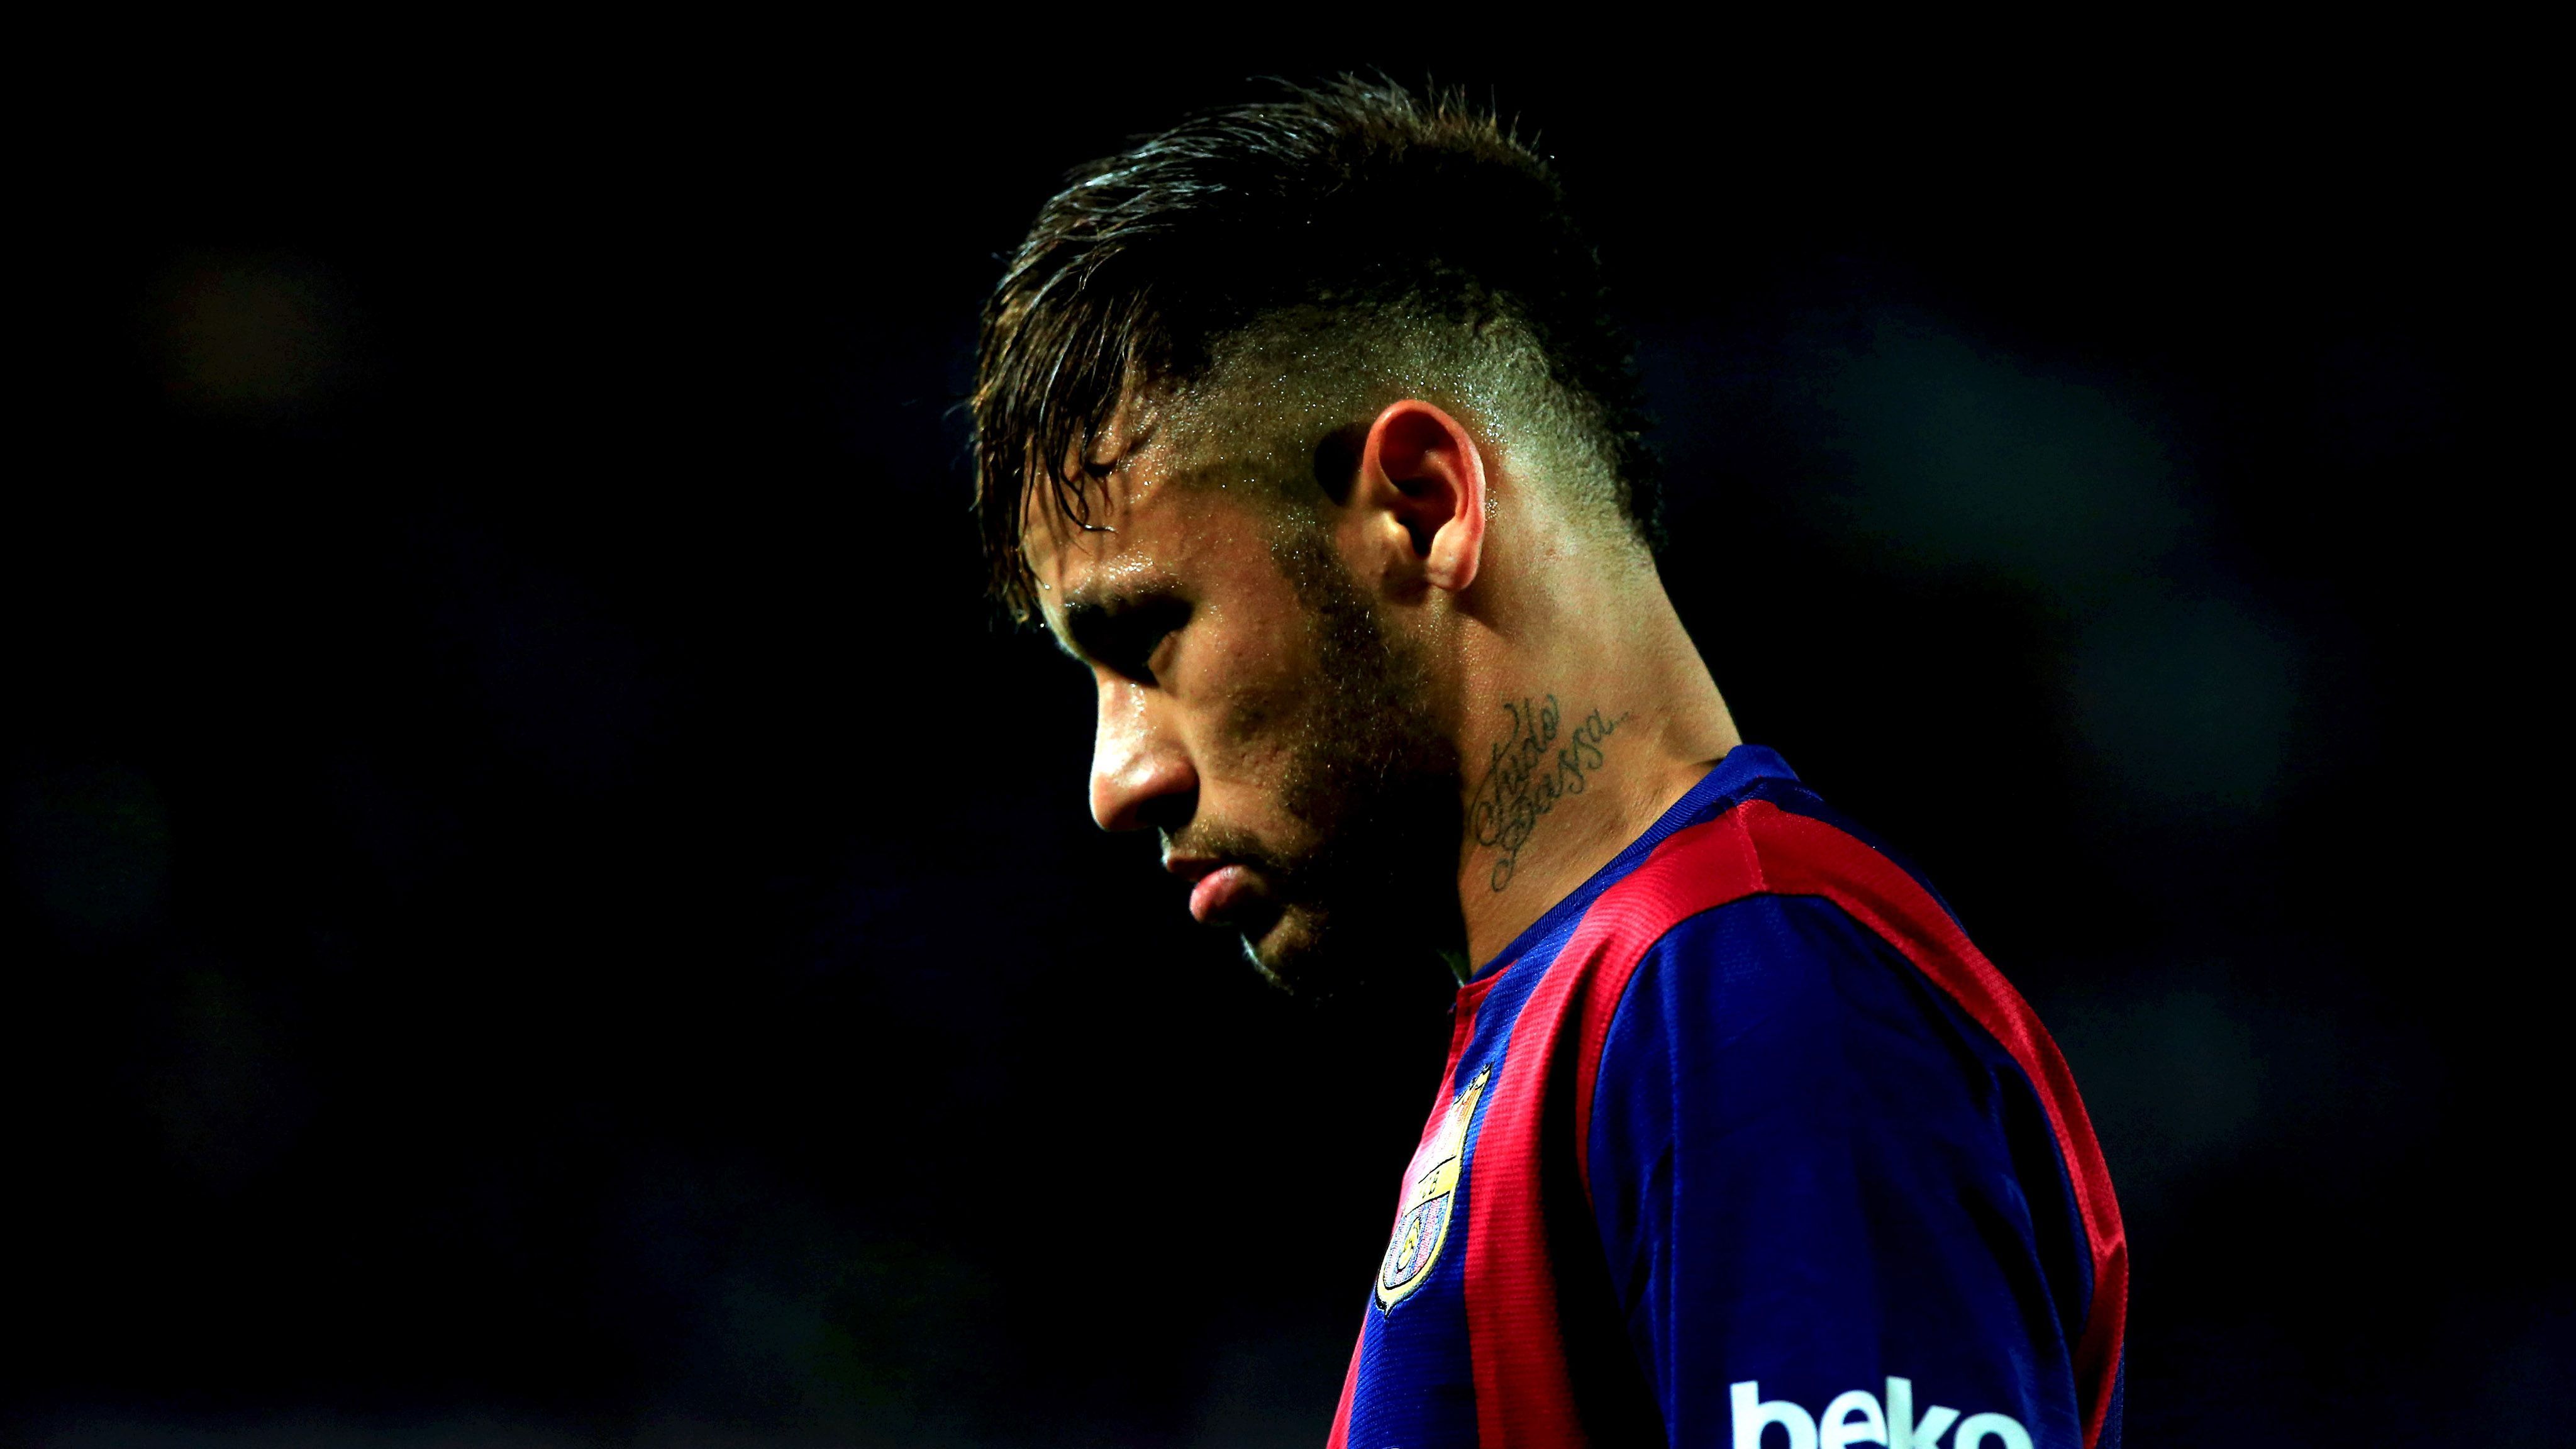 Neymar Wallpaper: HD, 4K, 5K for PC and Mobile. Download